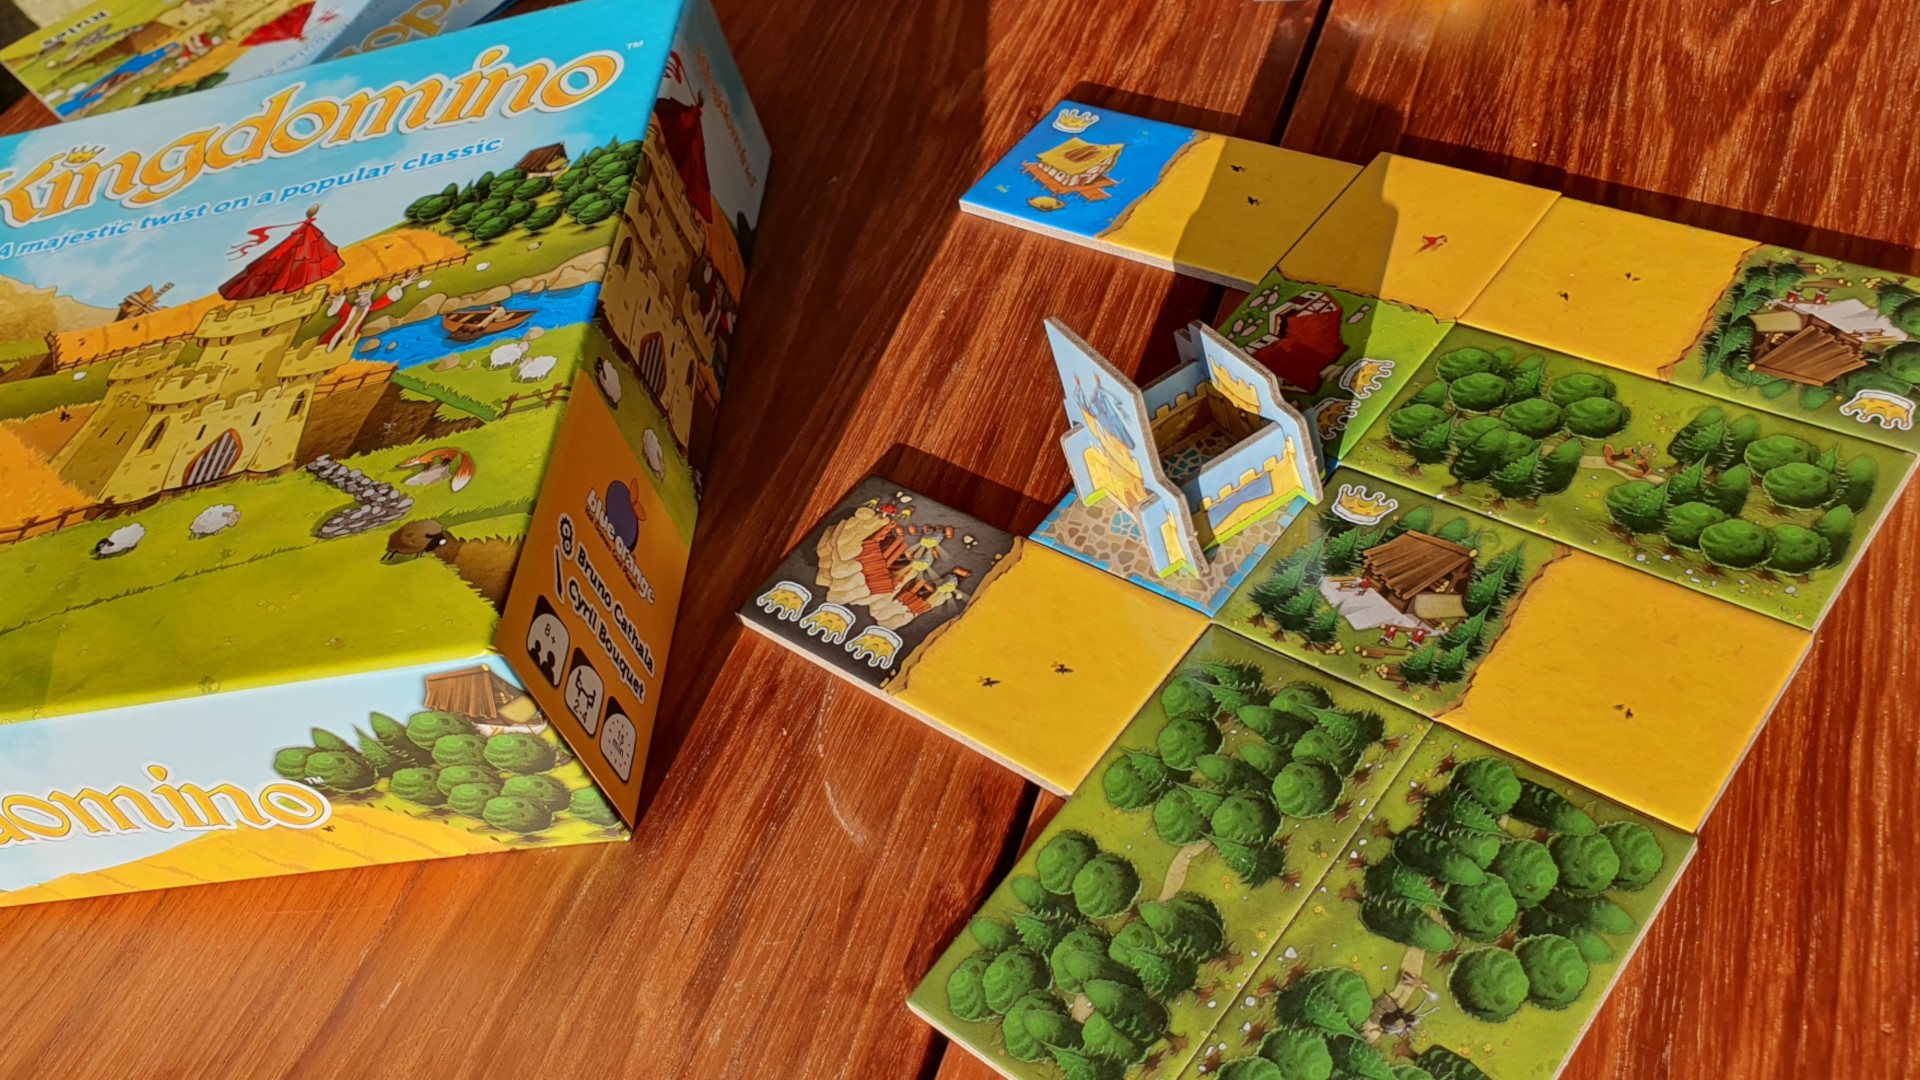 Kingdomino — Games for Young Minds